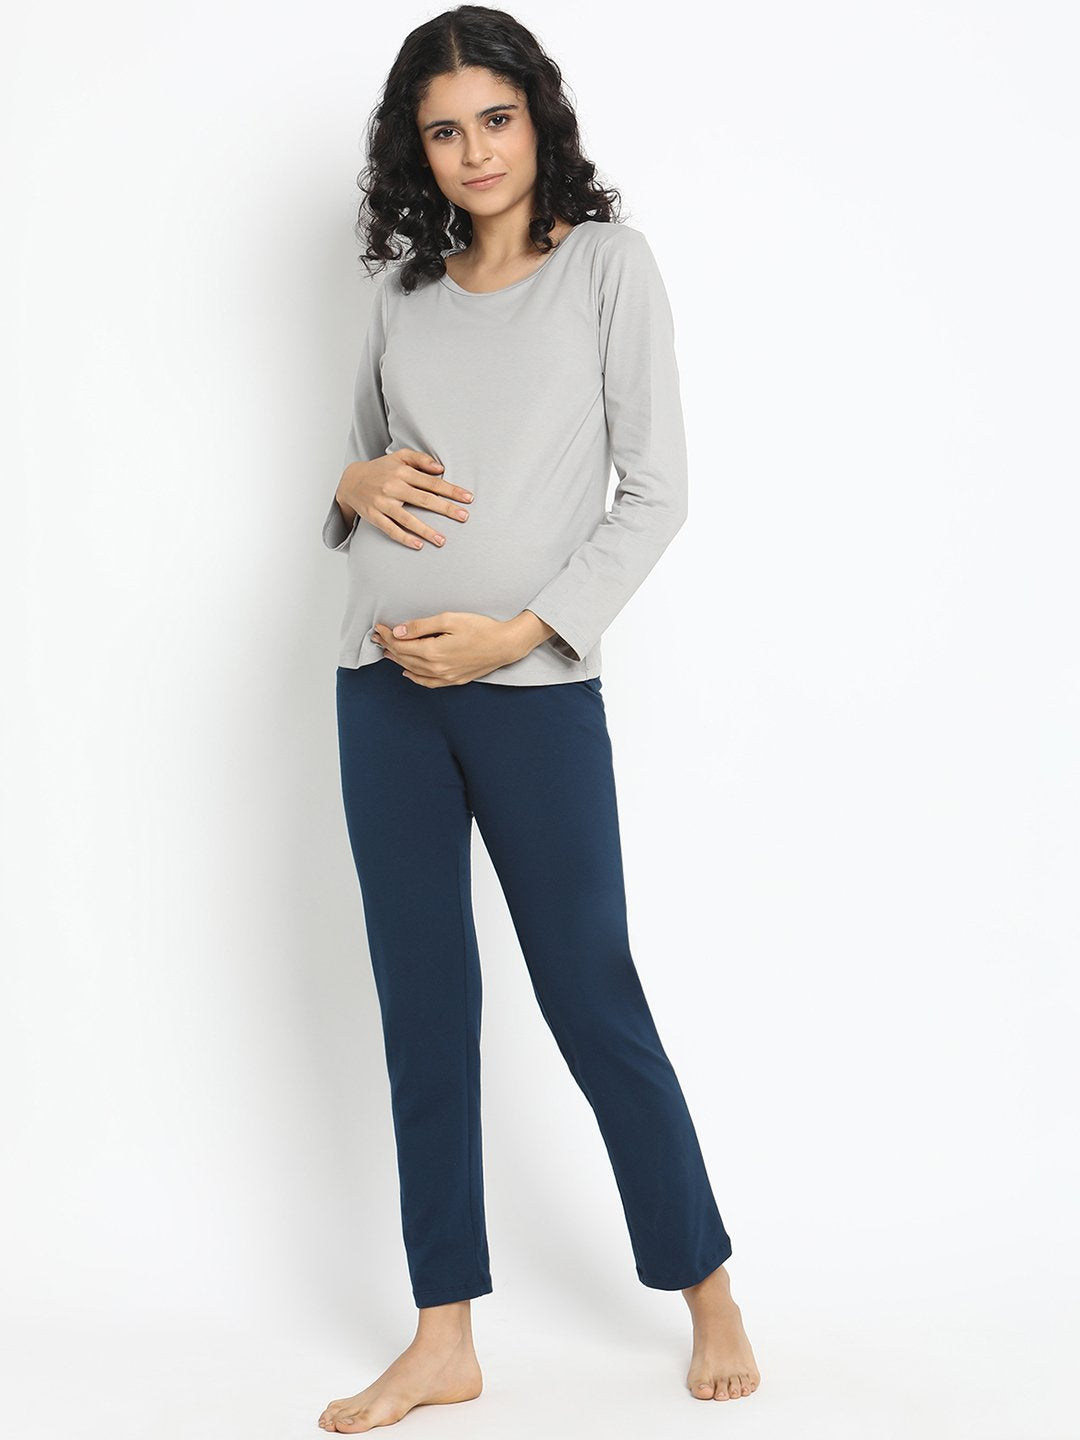 Baby Moo Soft And Comfy Mid-Calf Length Maternity Pant Solid - Navy Bl